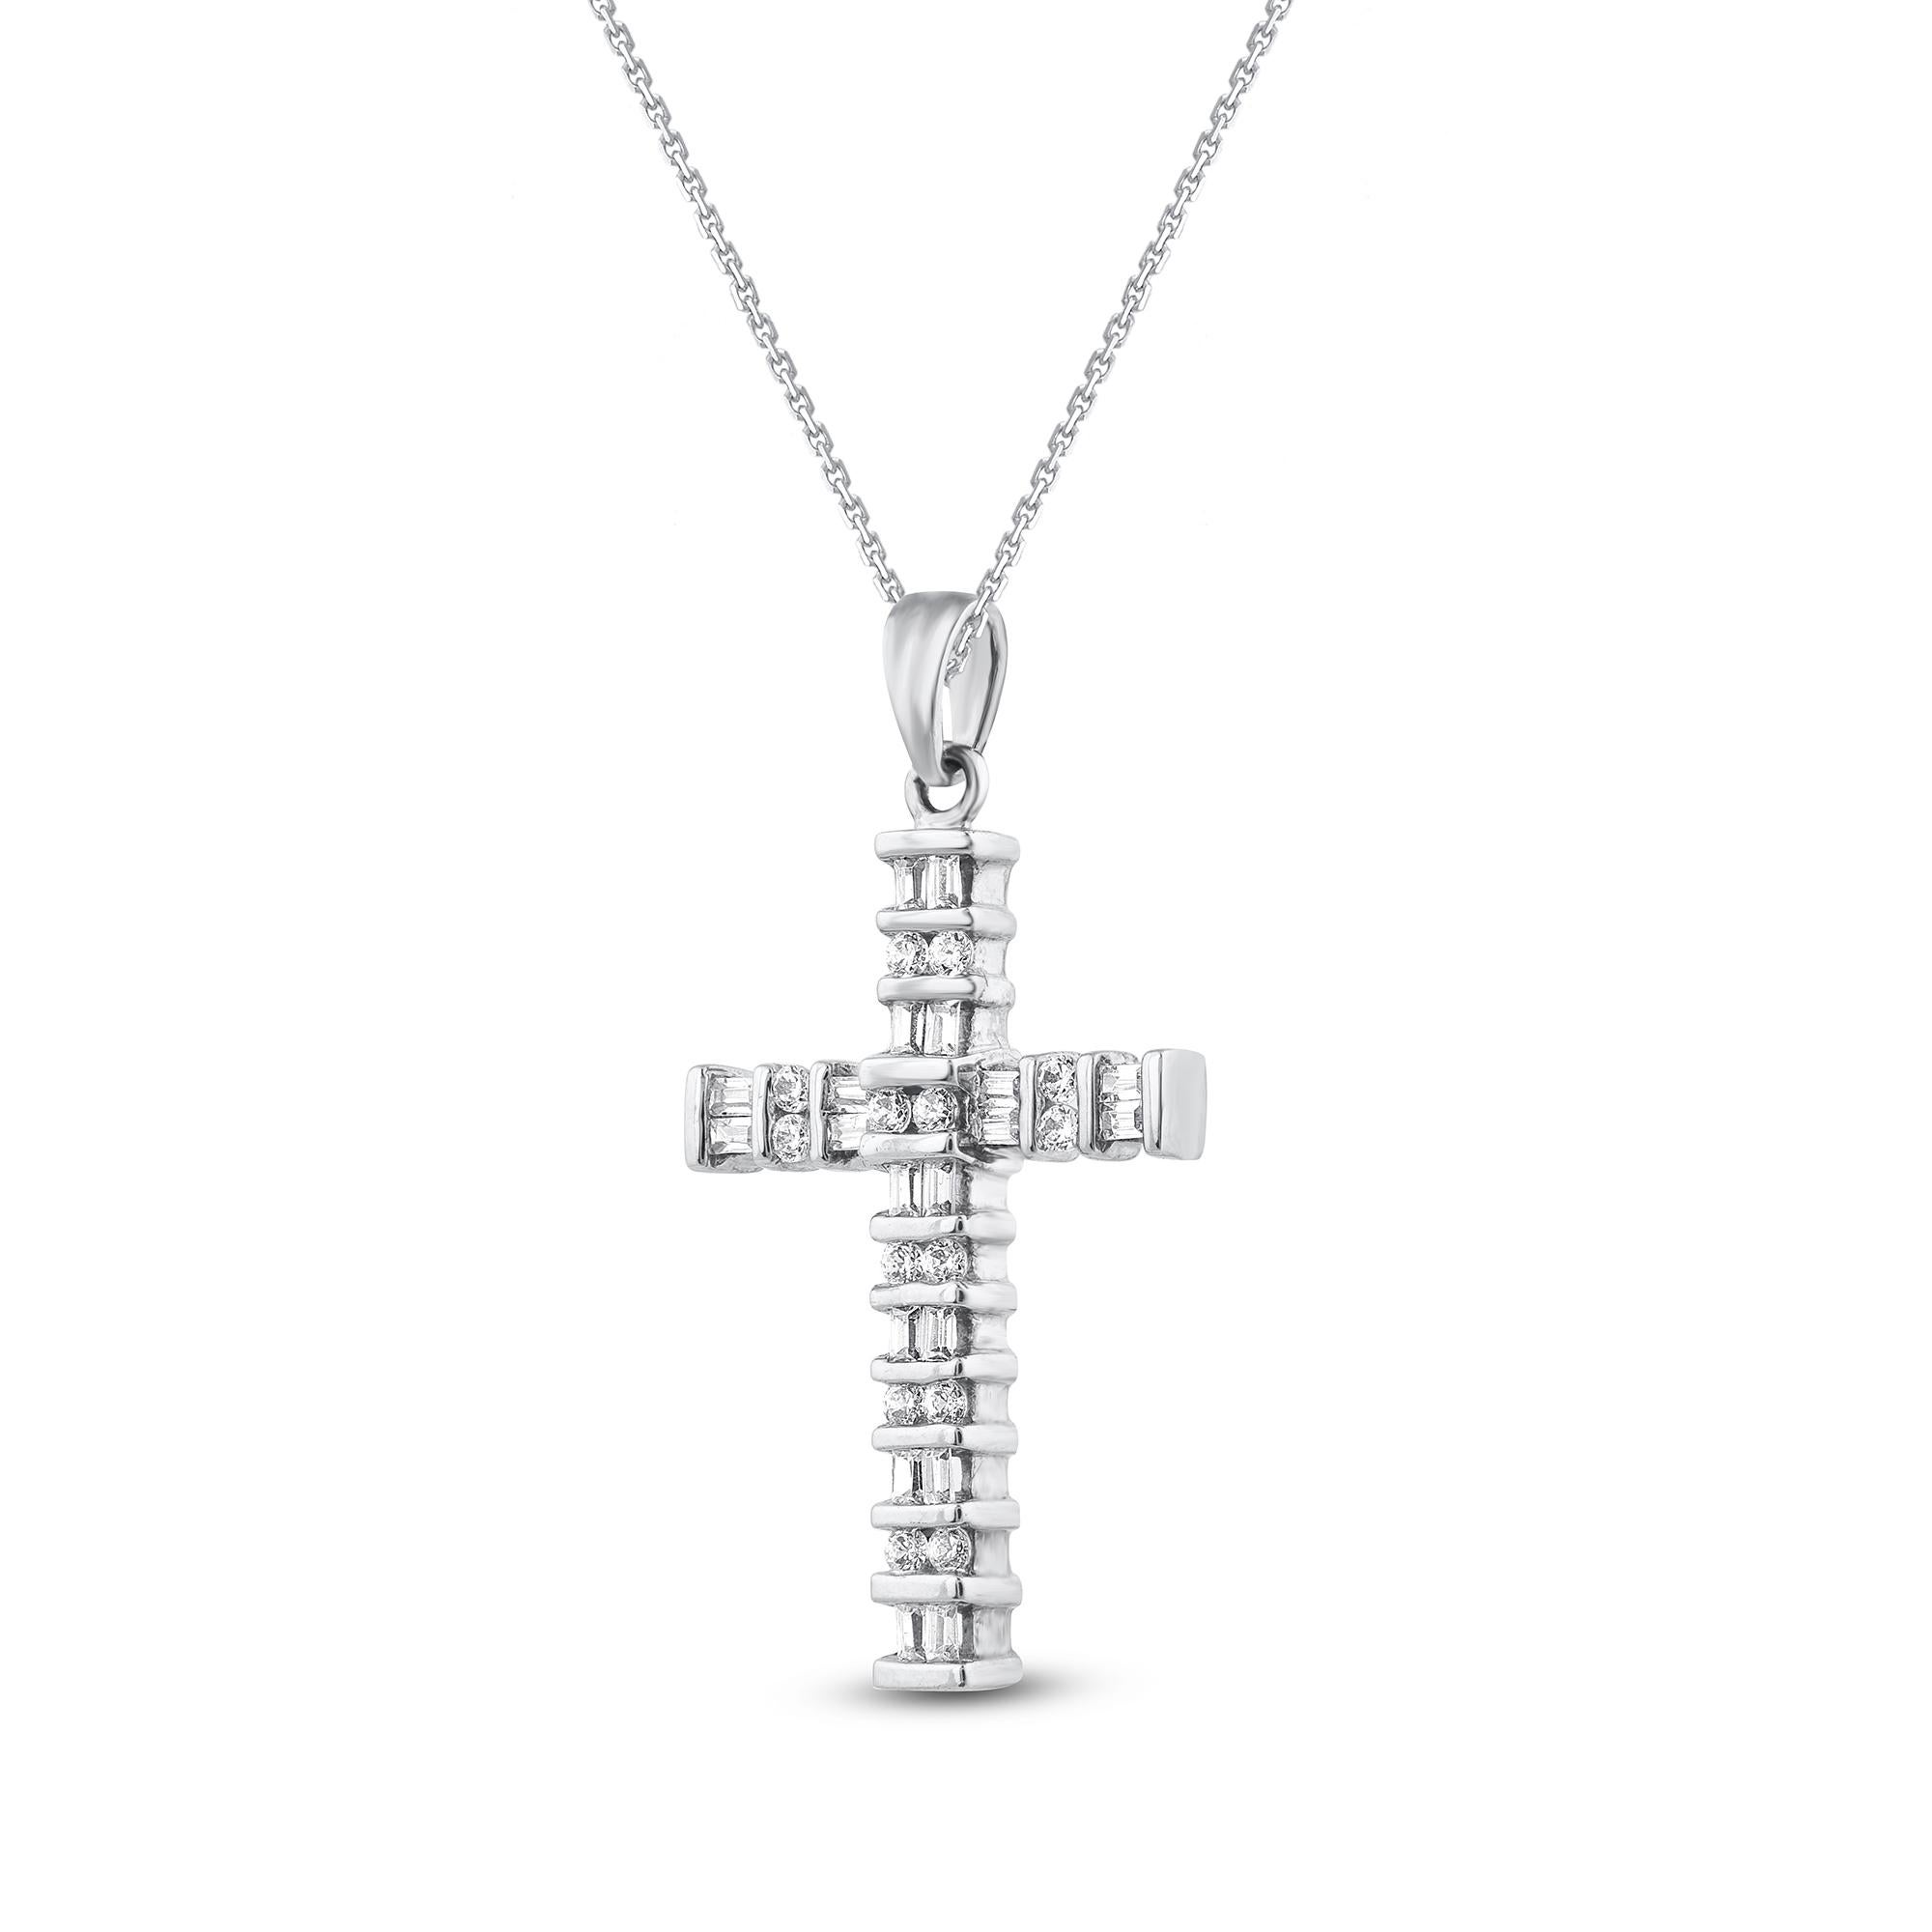 Make a bold statement of style and beliefs with the eye-catching elegance of this diamond cross pendant.  Beautifully crafted by our inhouse experts in 14 karat white gold and embellished with 44 round brilliant cut & baguette cut diamond set in